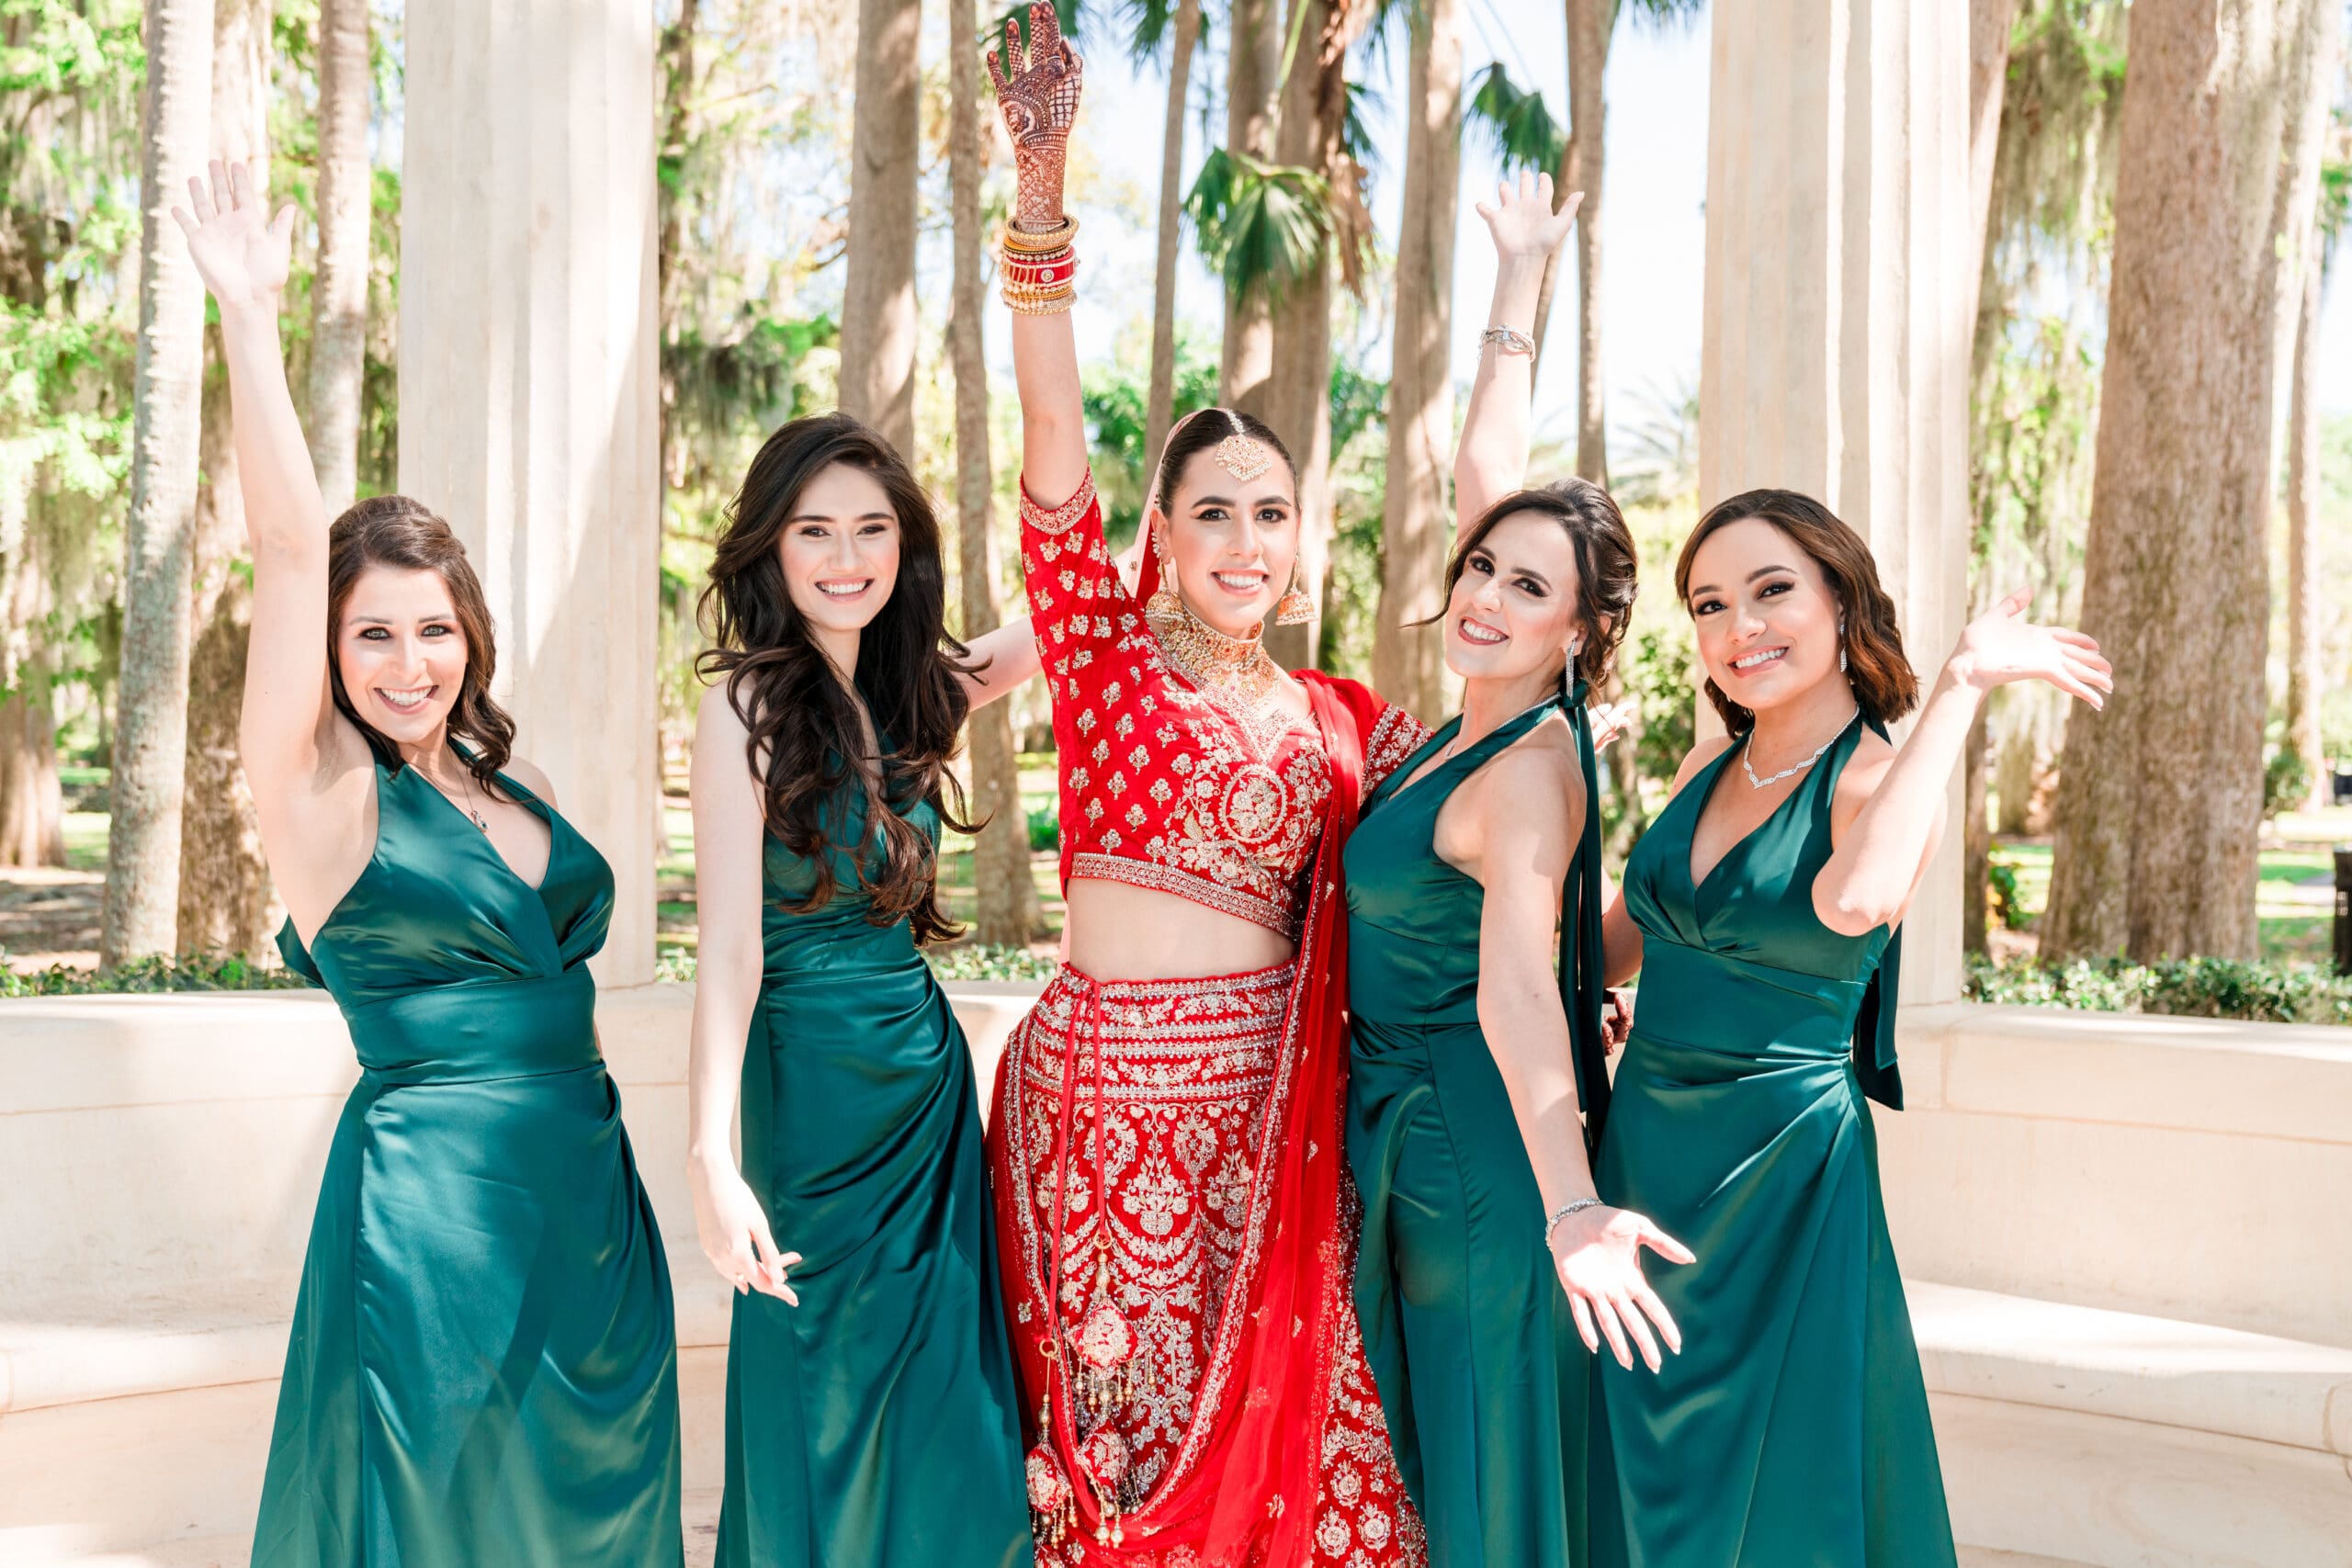 Radiant bride sharing a heartwarming moment filled with laughter and smiles alongside her beautiful bridesmaids, creating unforgettable memories at All Inclusive Weddings Orlando